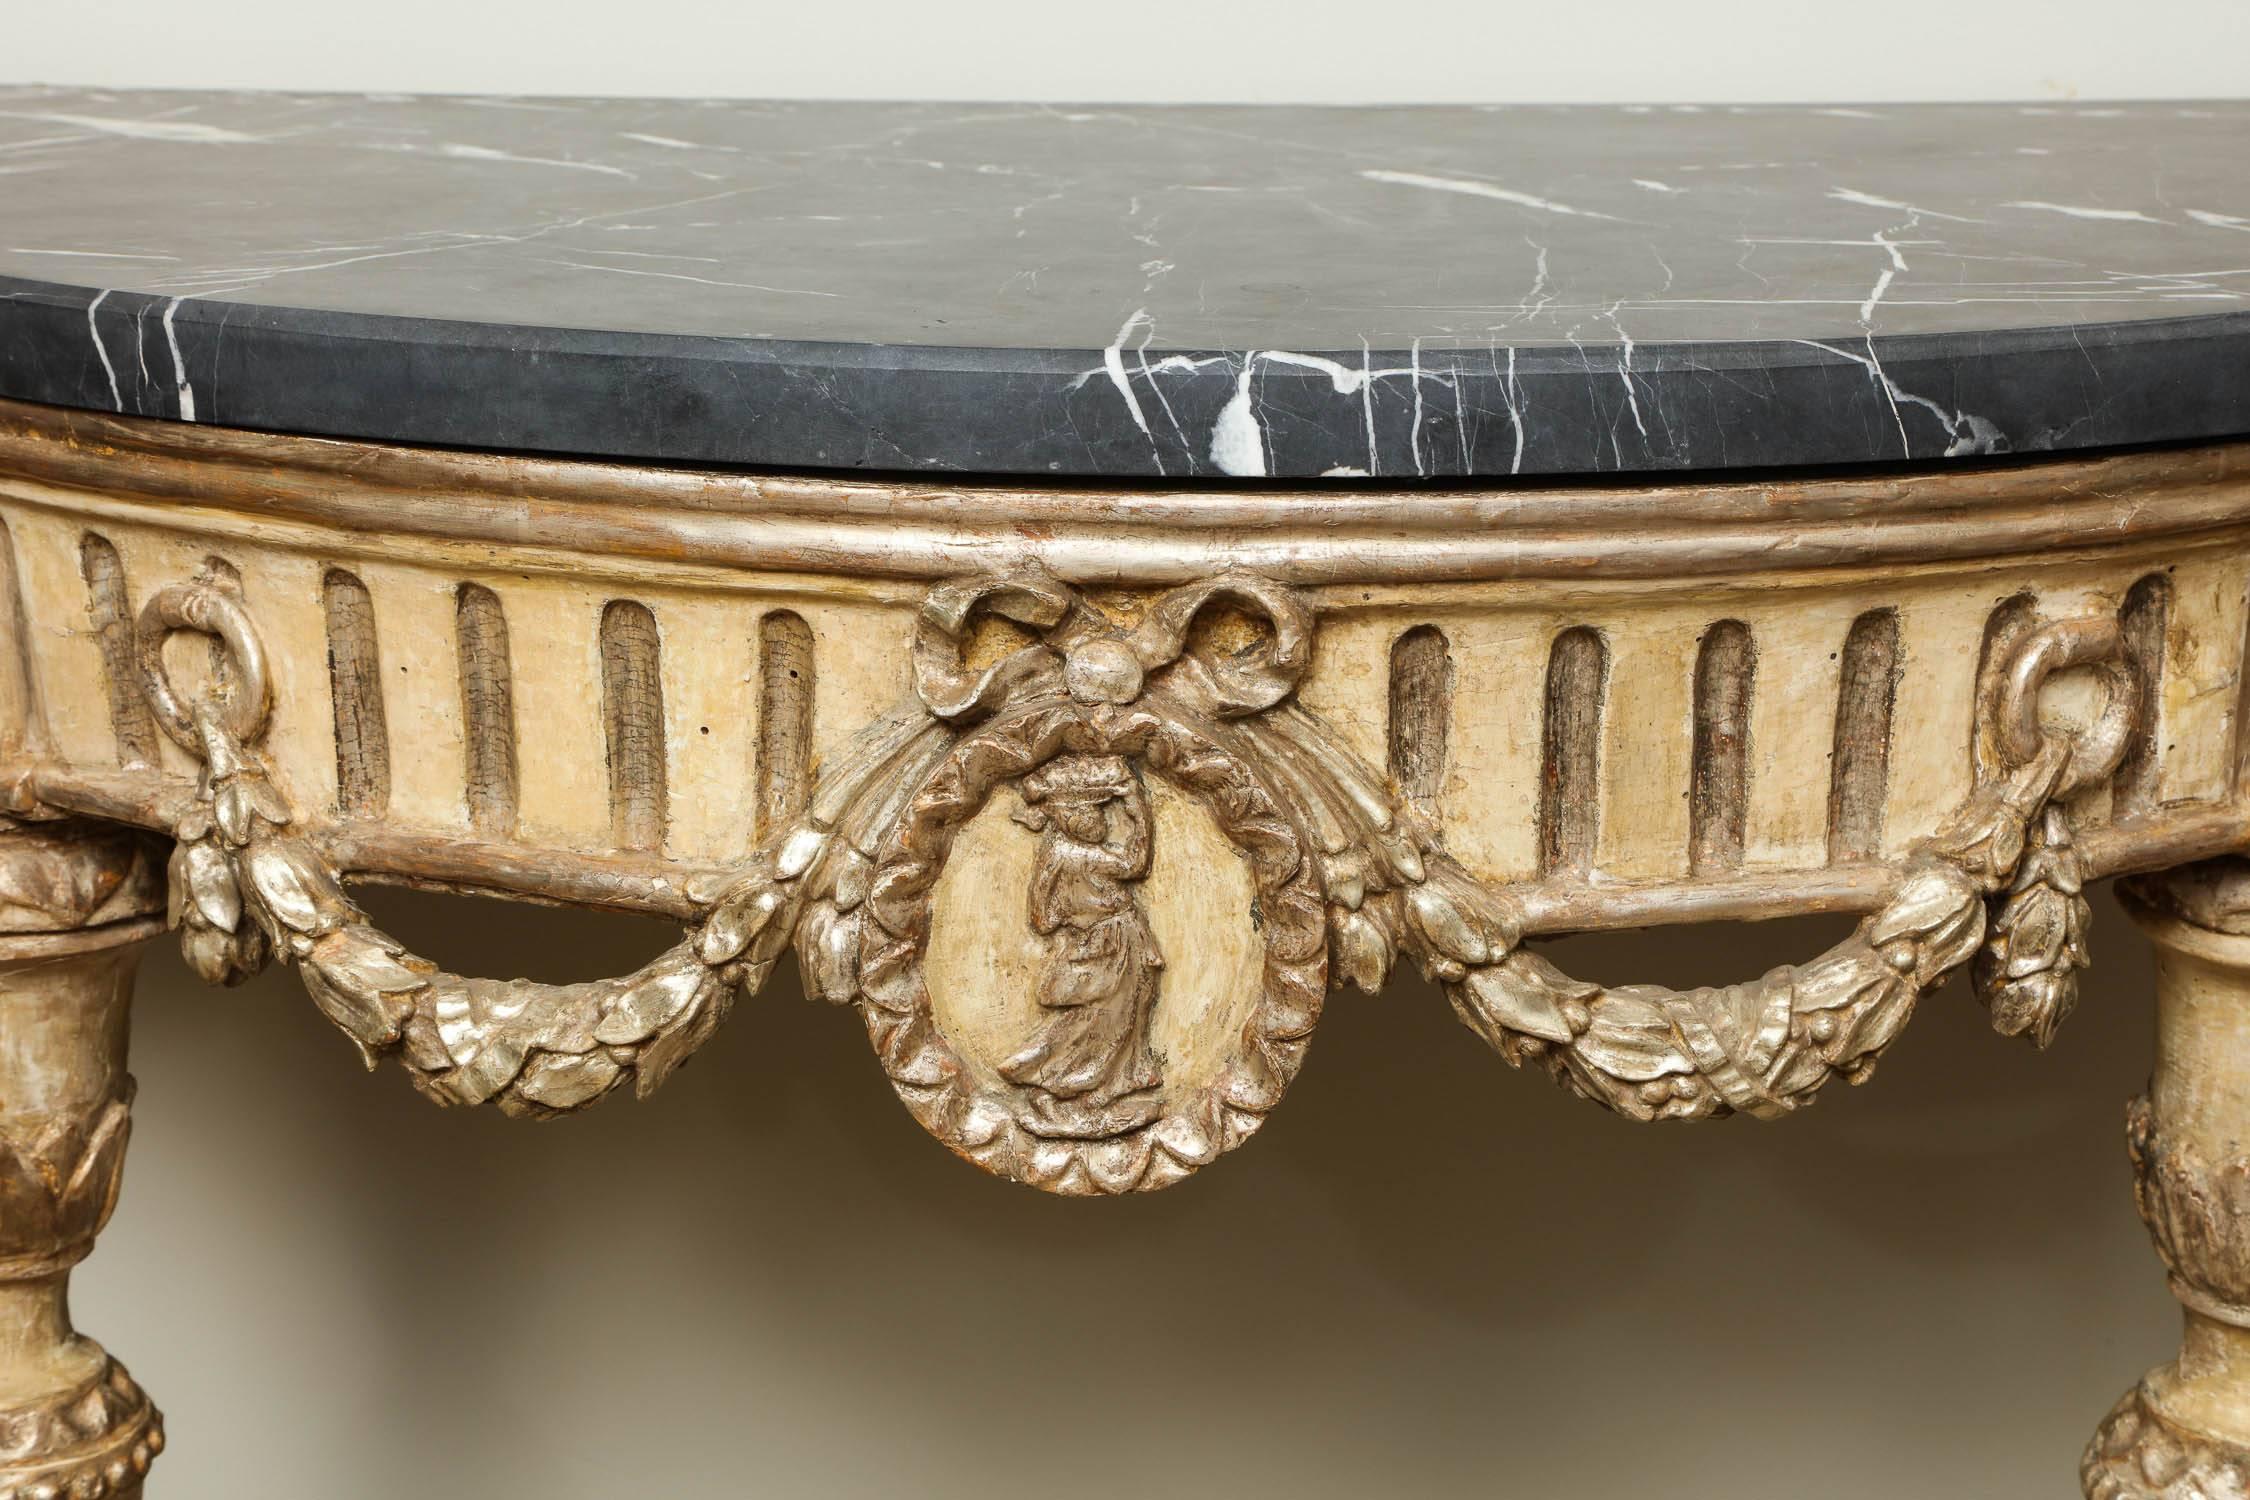 Fine pair of 18th century Italian neoclassical demilune console tables, the later shaped white veined black marble over fluted apron adorned with swags and central medallions, standing on turned, carved and fluted legs and standing on foliate carved